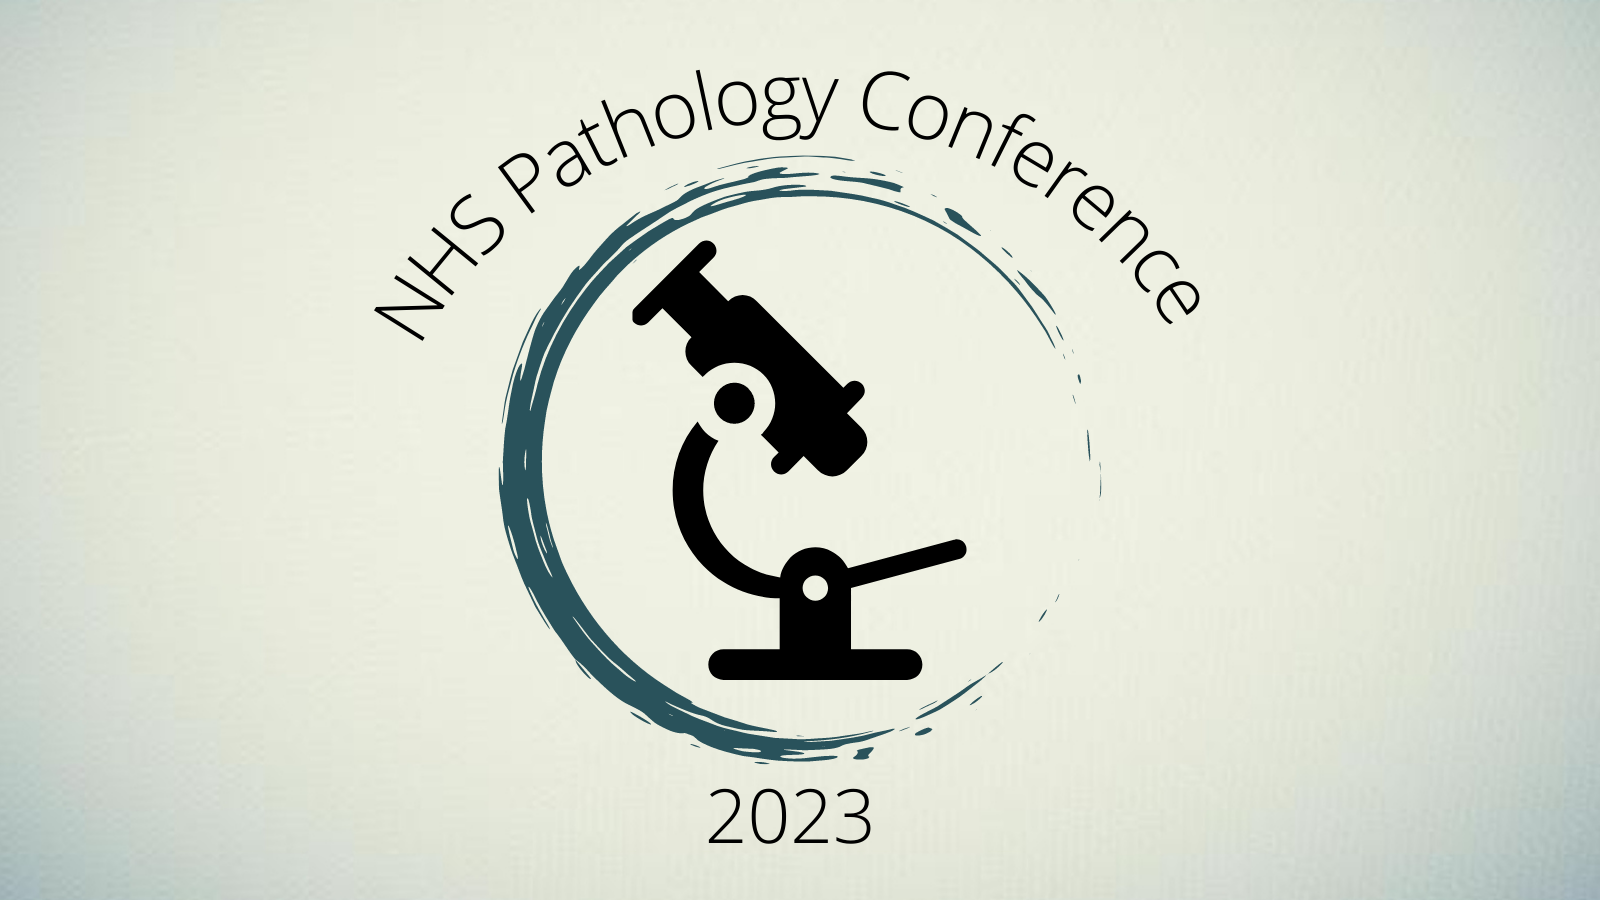 Convenzis Event NHS Pathology Conference 2023